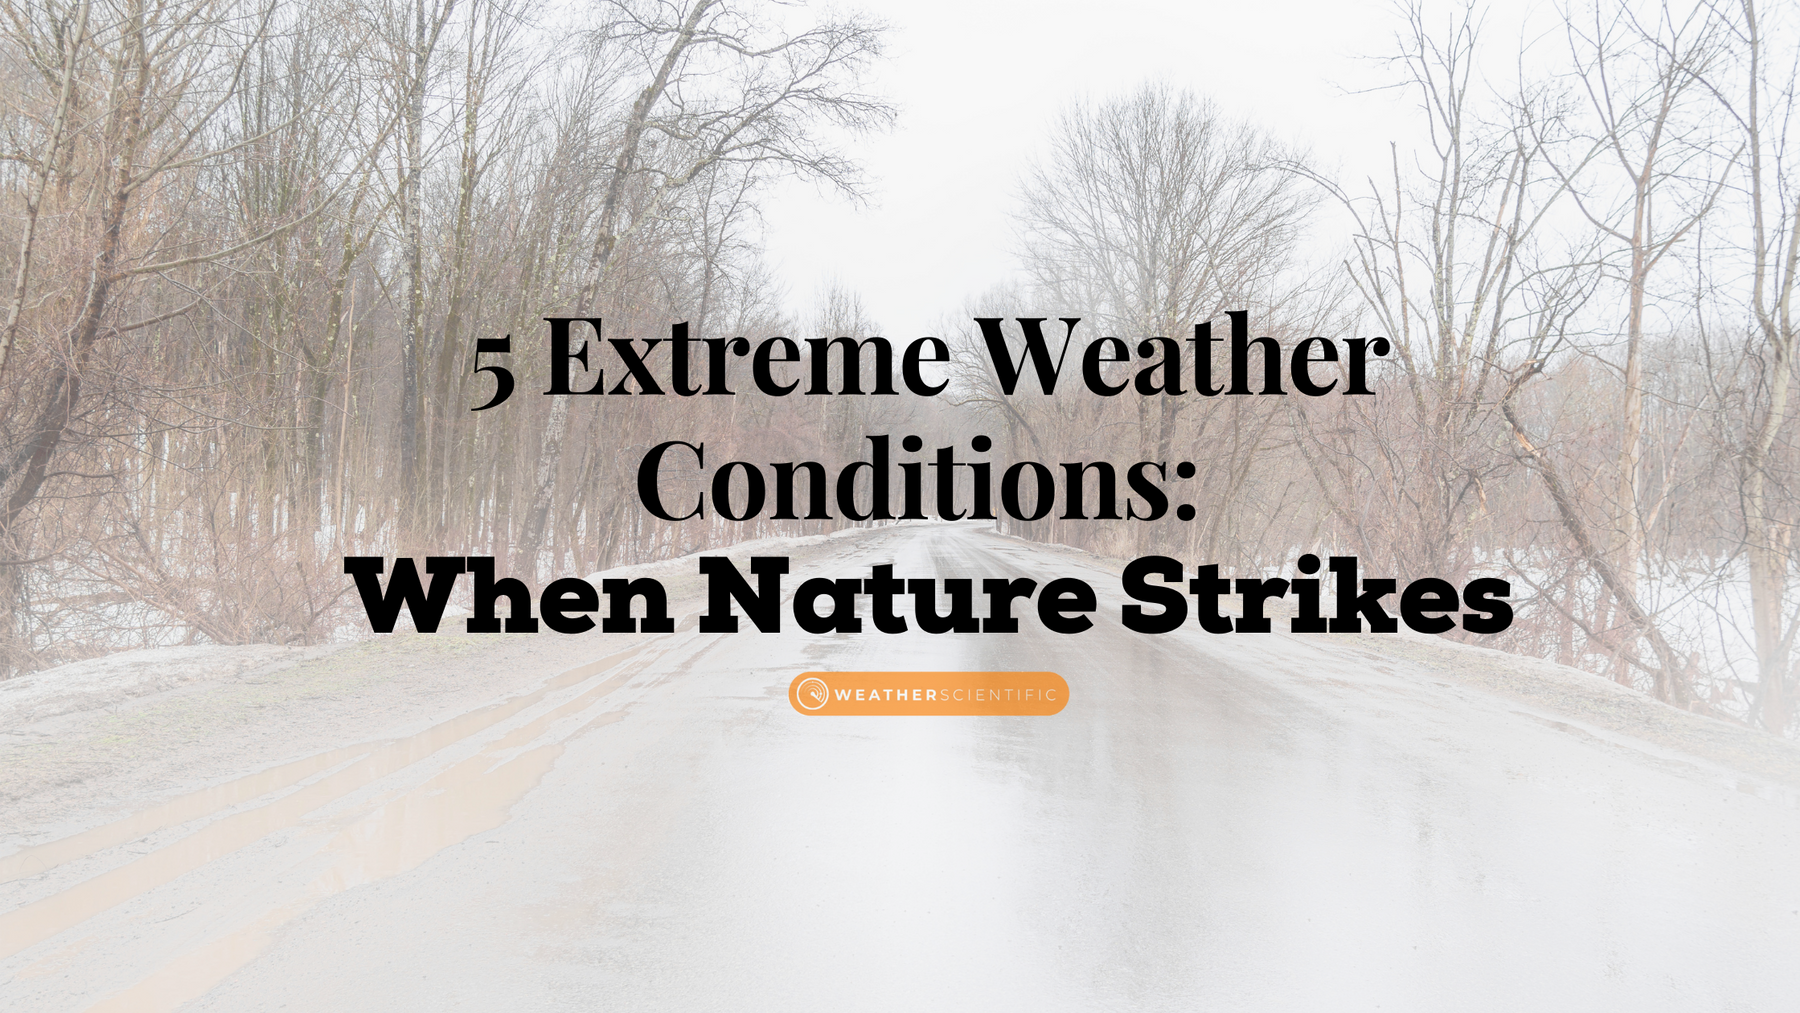 5 Extreme Weather Conditions:When Nature Strikes by WeatherScientific.com